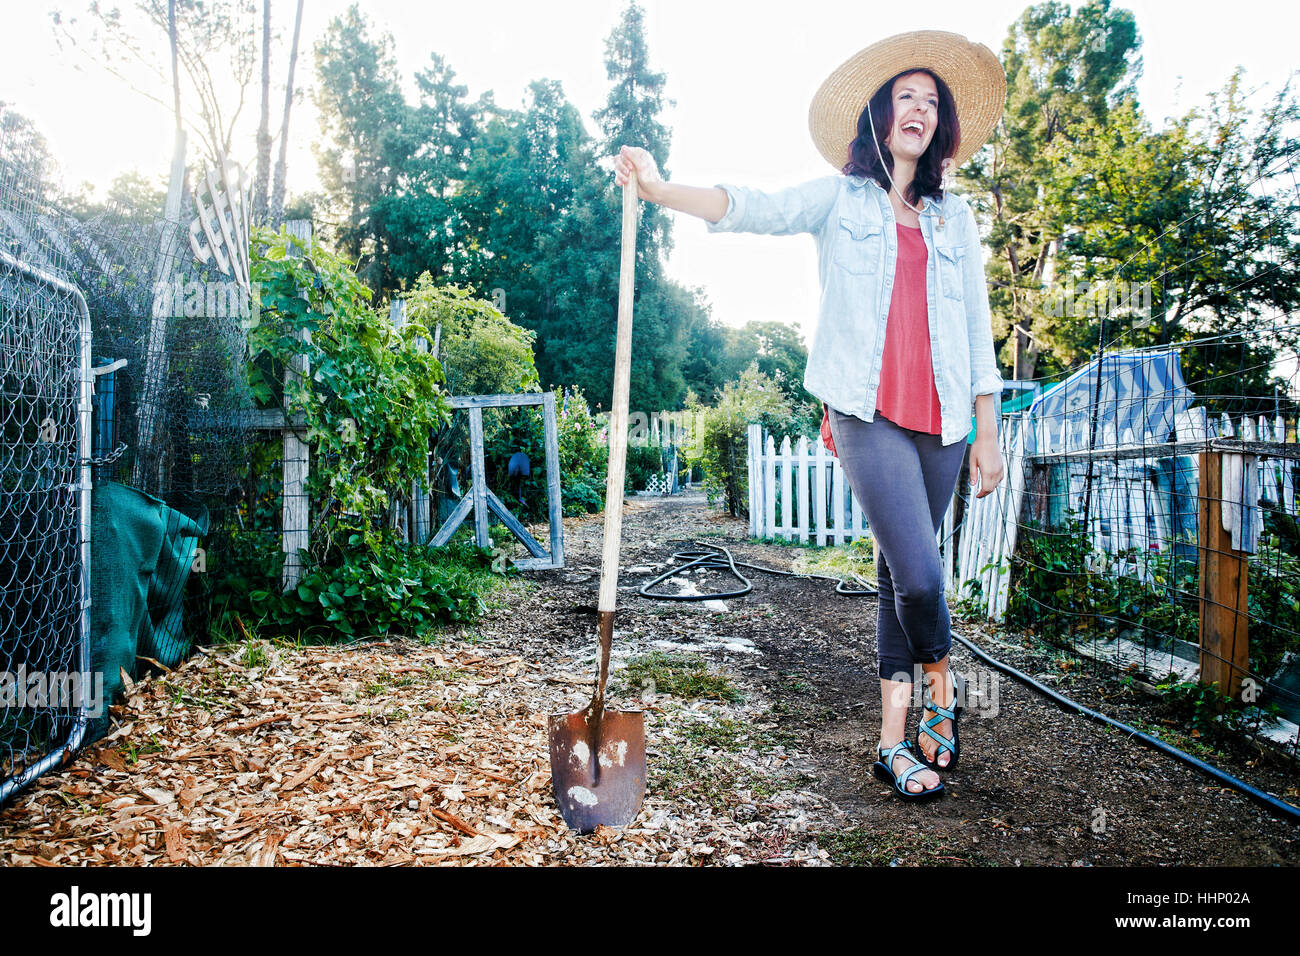 Laughing Caucasian woman leaning on shovel in garden Stock Photo